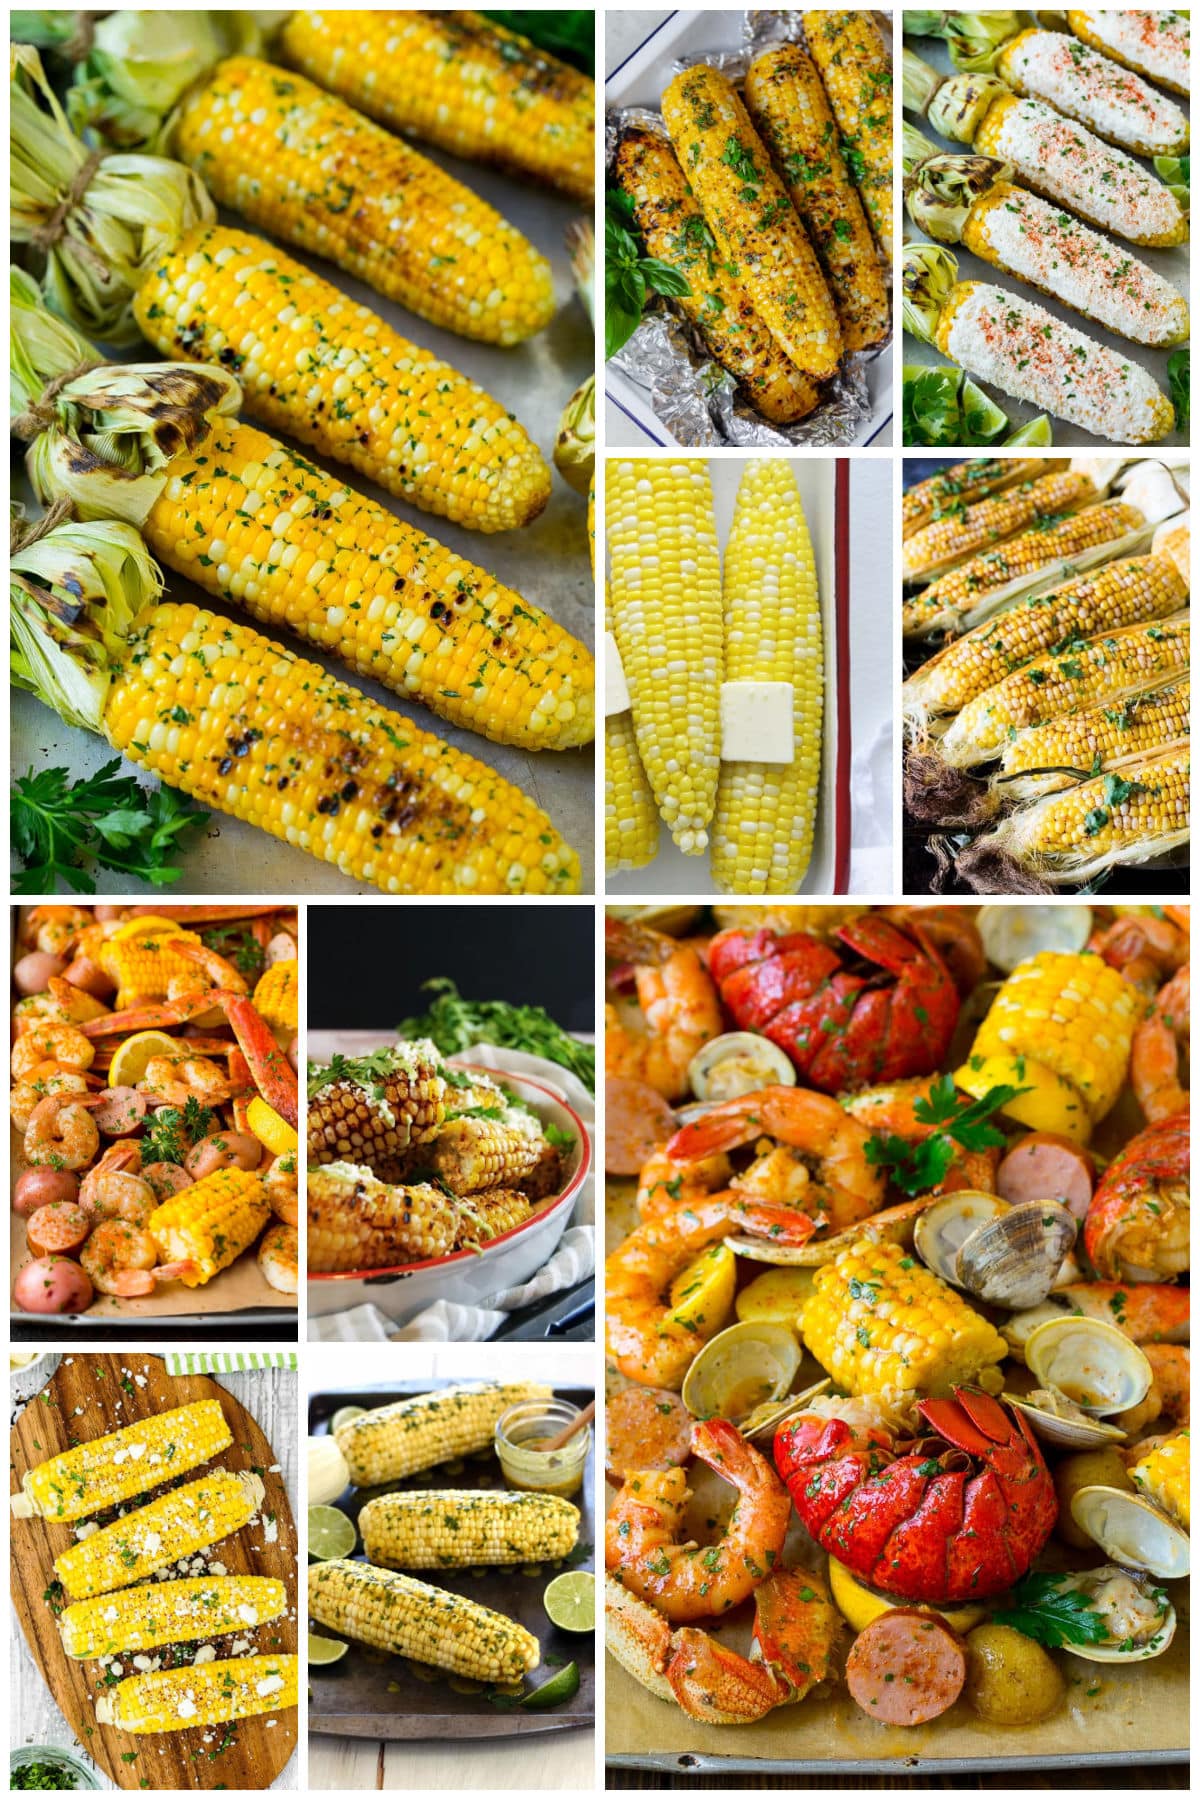 Images of corn dishes such as grilled corn, a seafood boil and instant pot corn on the cob.